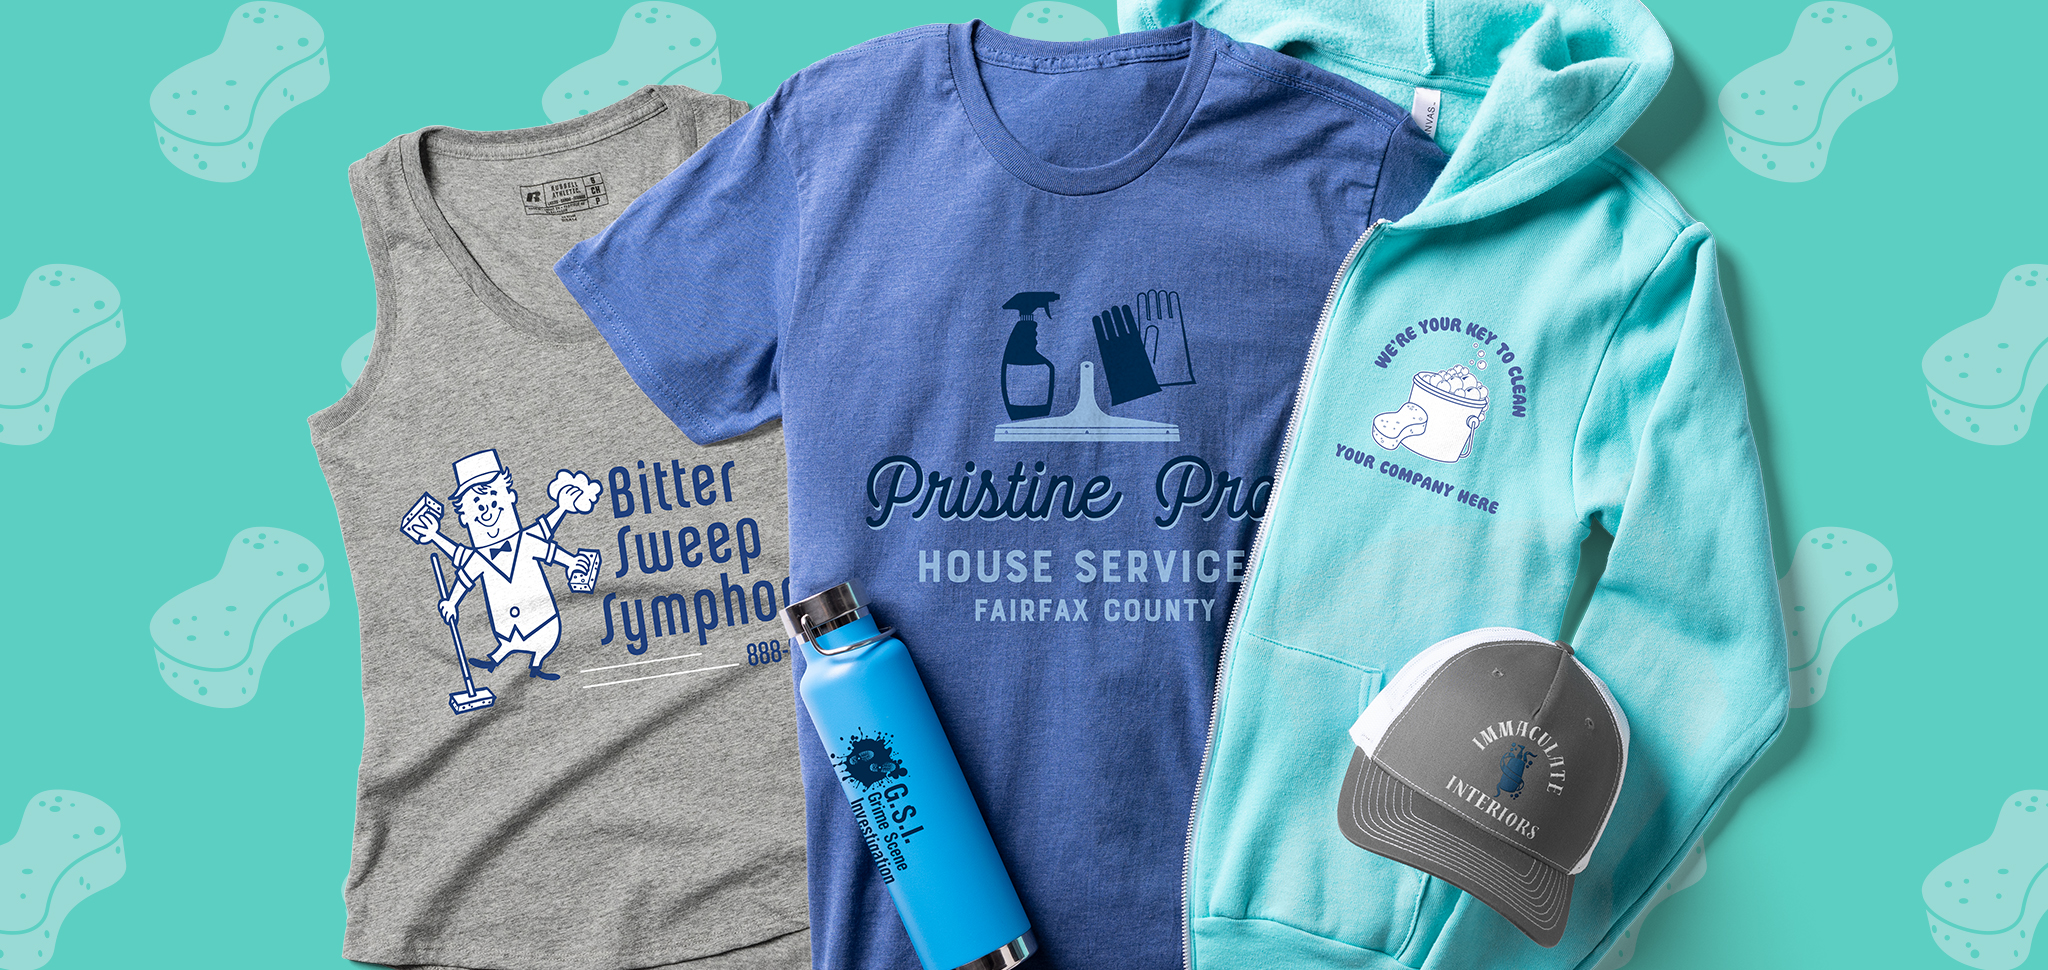 A graphic showing various custom apparel and accessories: a tank top that reads “Bitter Sweep Symphony”; a t-shirt that reads “Pristine Pros Services / Fairfax County”; a zip-up hoodie that reads “We’re Your Key to Clean / Your Company Here”; a water bottle that reads “G.S.I.: Grime Scene Investigation”; and a baseball hat that reads “Immaculate Interiors.” 